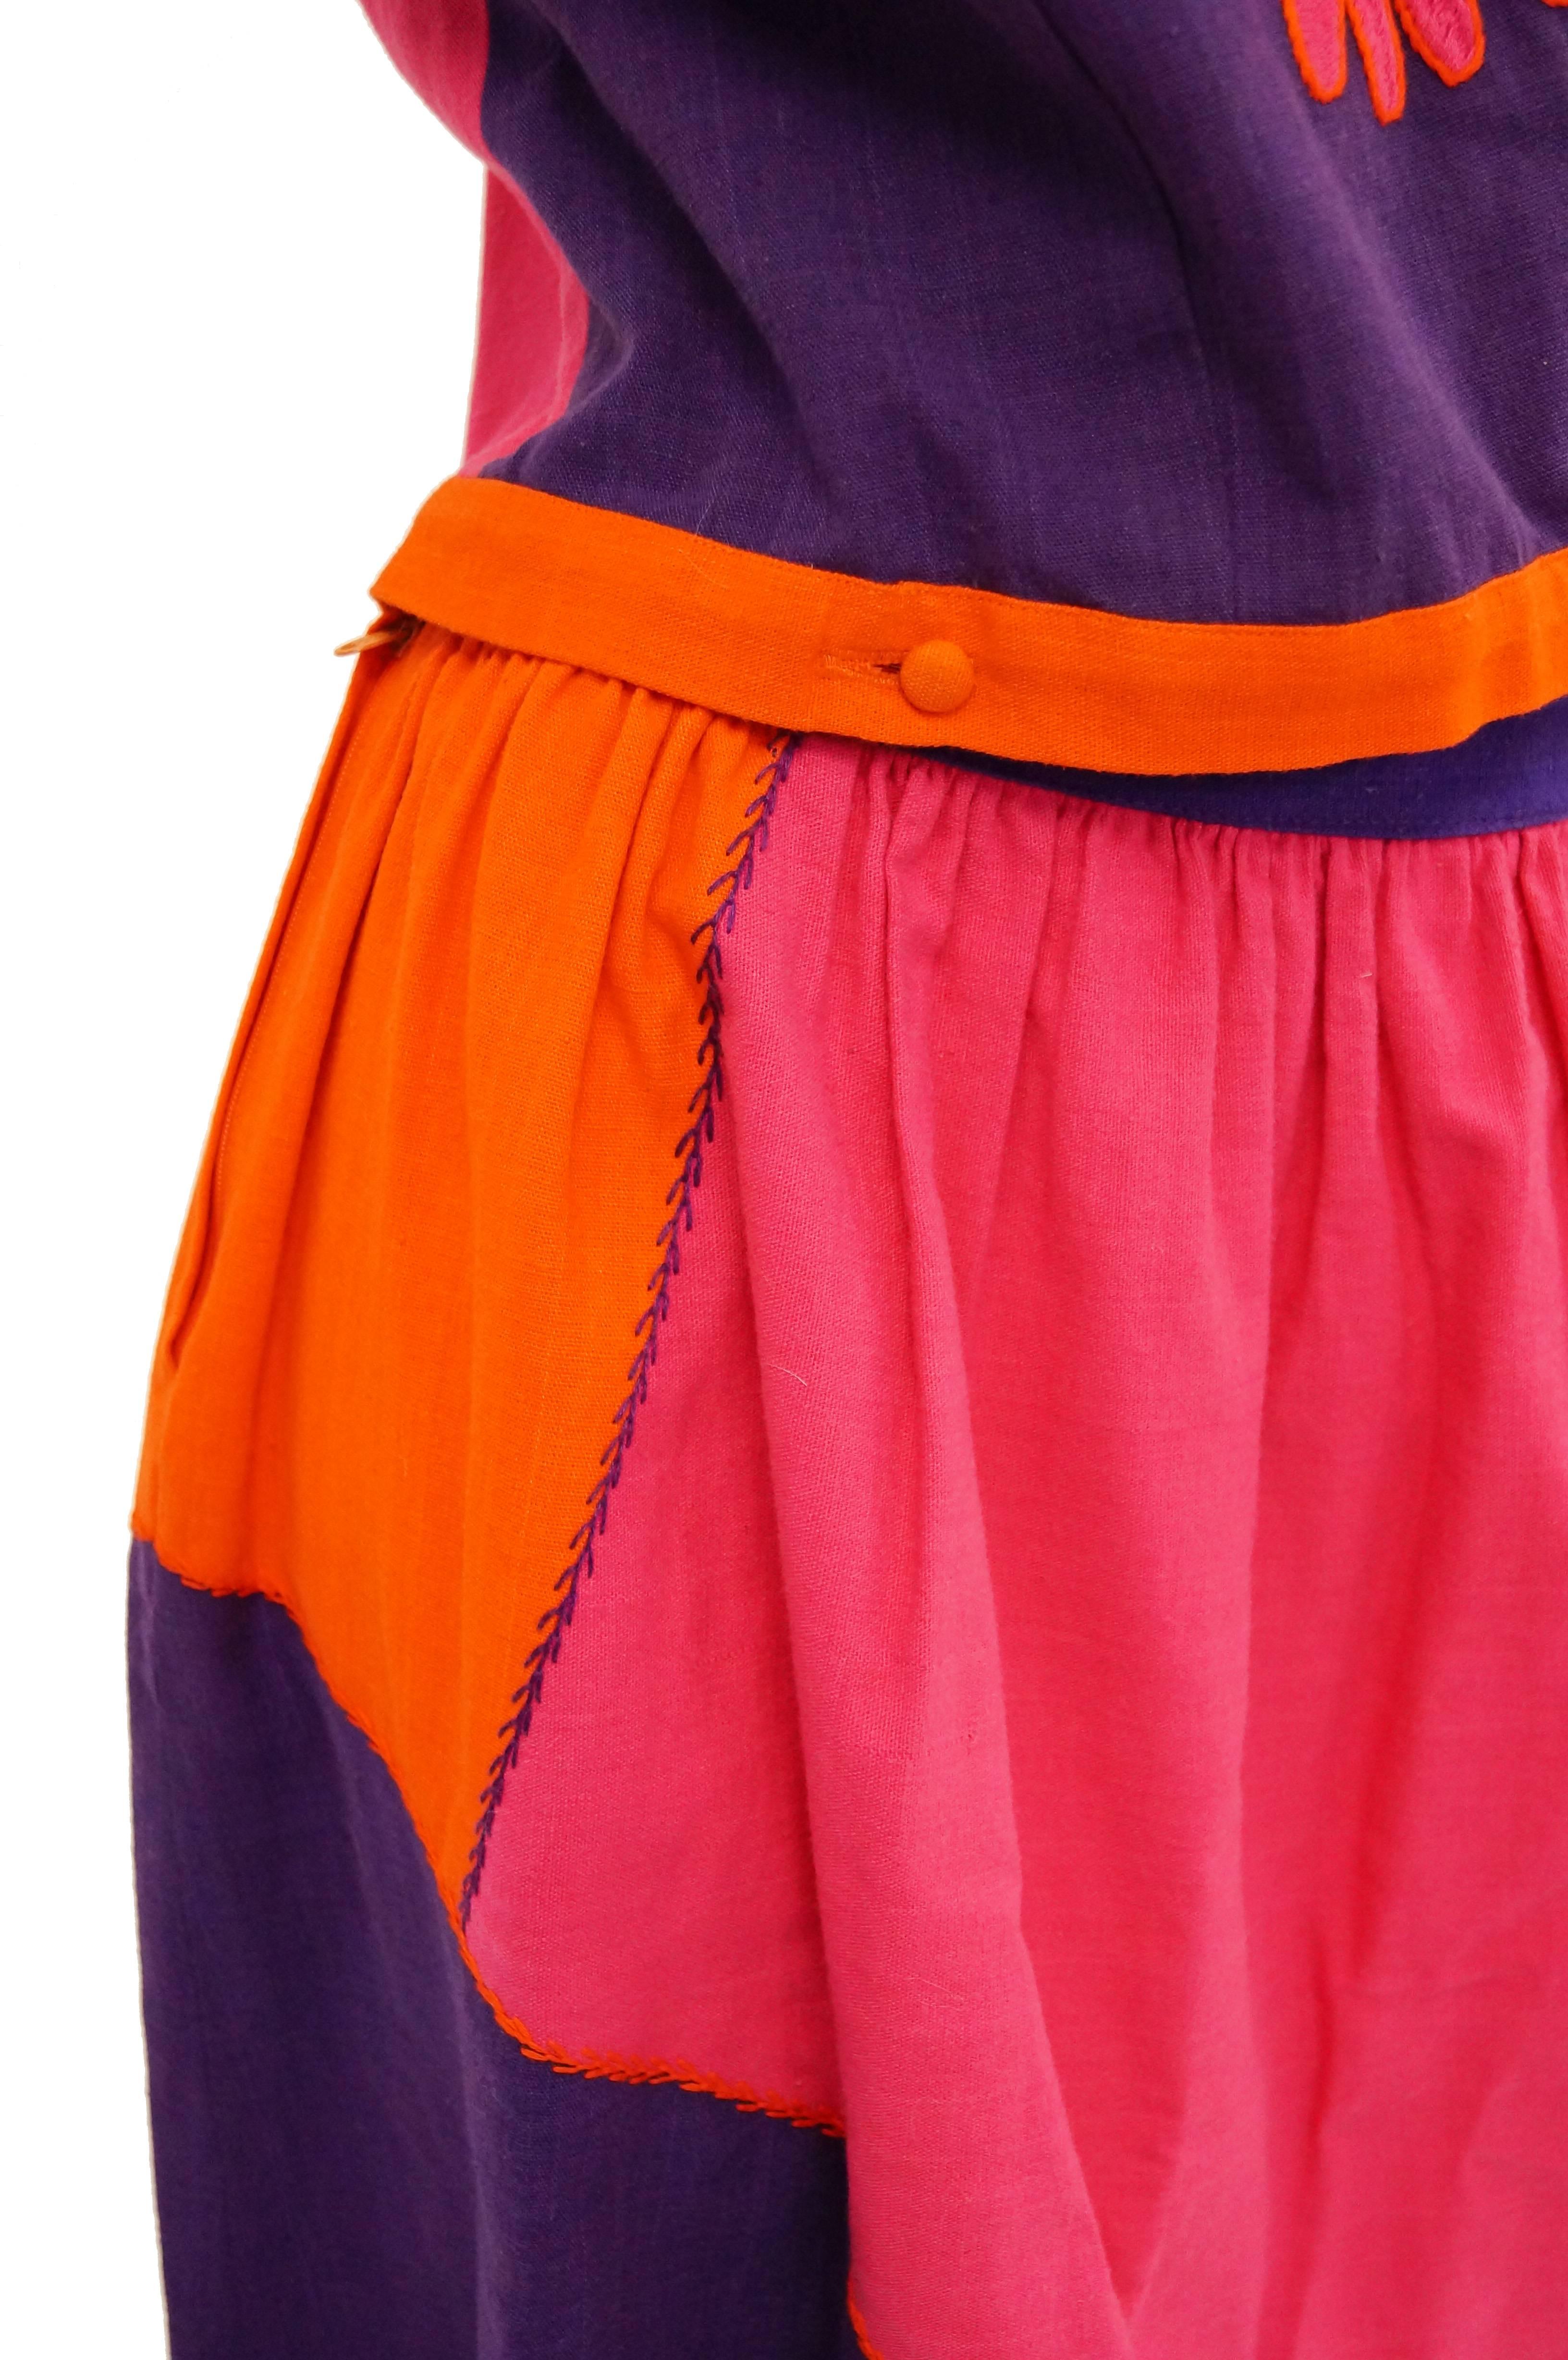 1960s Josefa Pink, Orange, and Purple Embroidered Mexican Shirt and Top For Sale 3